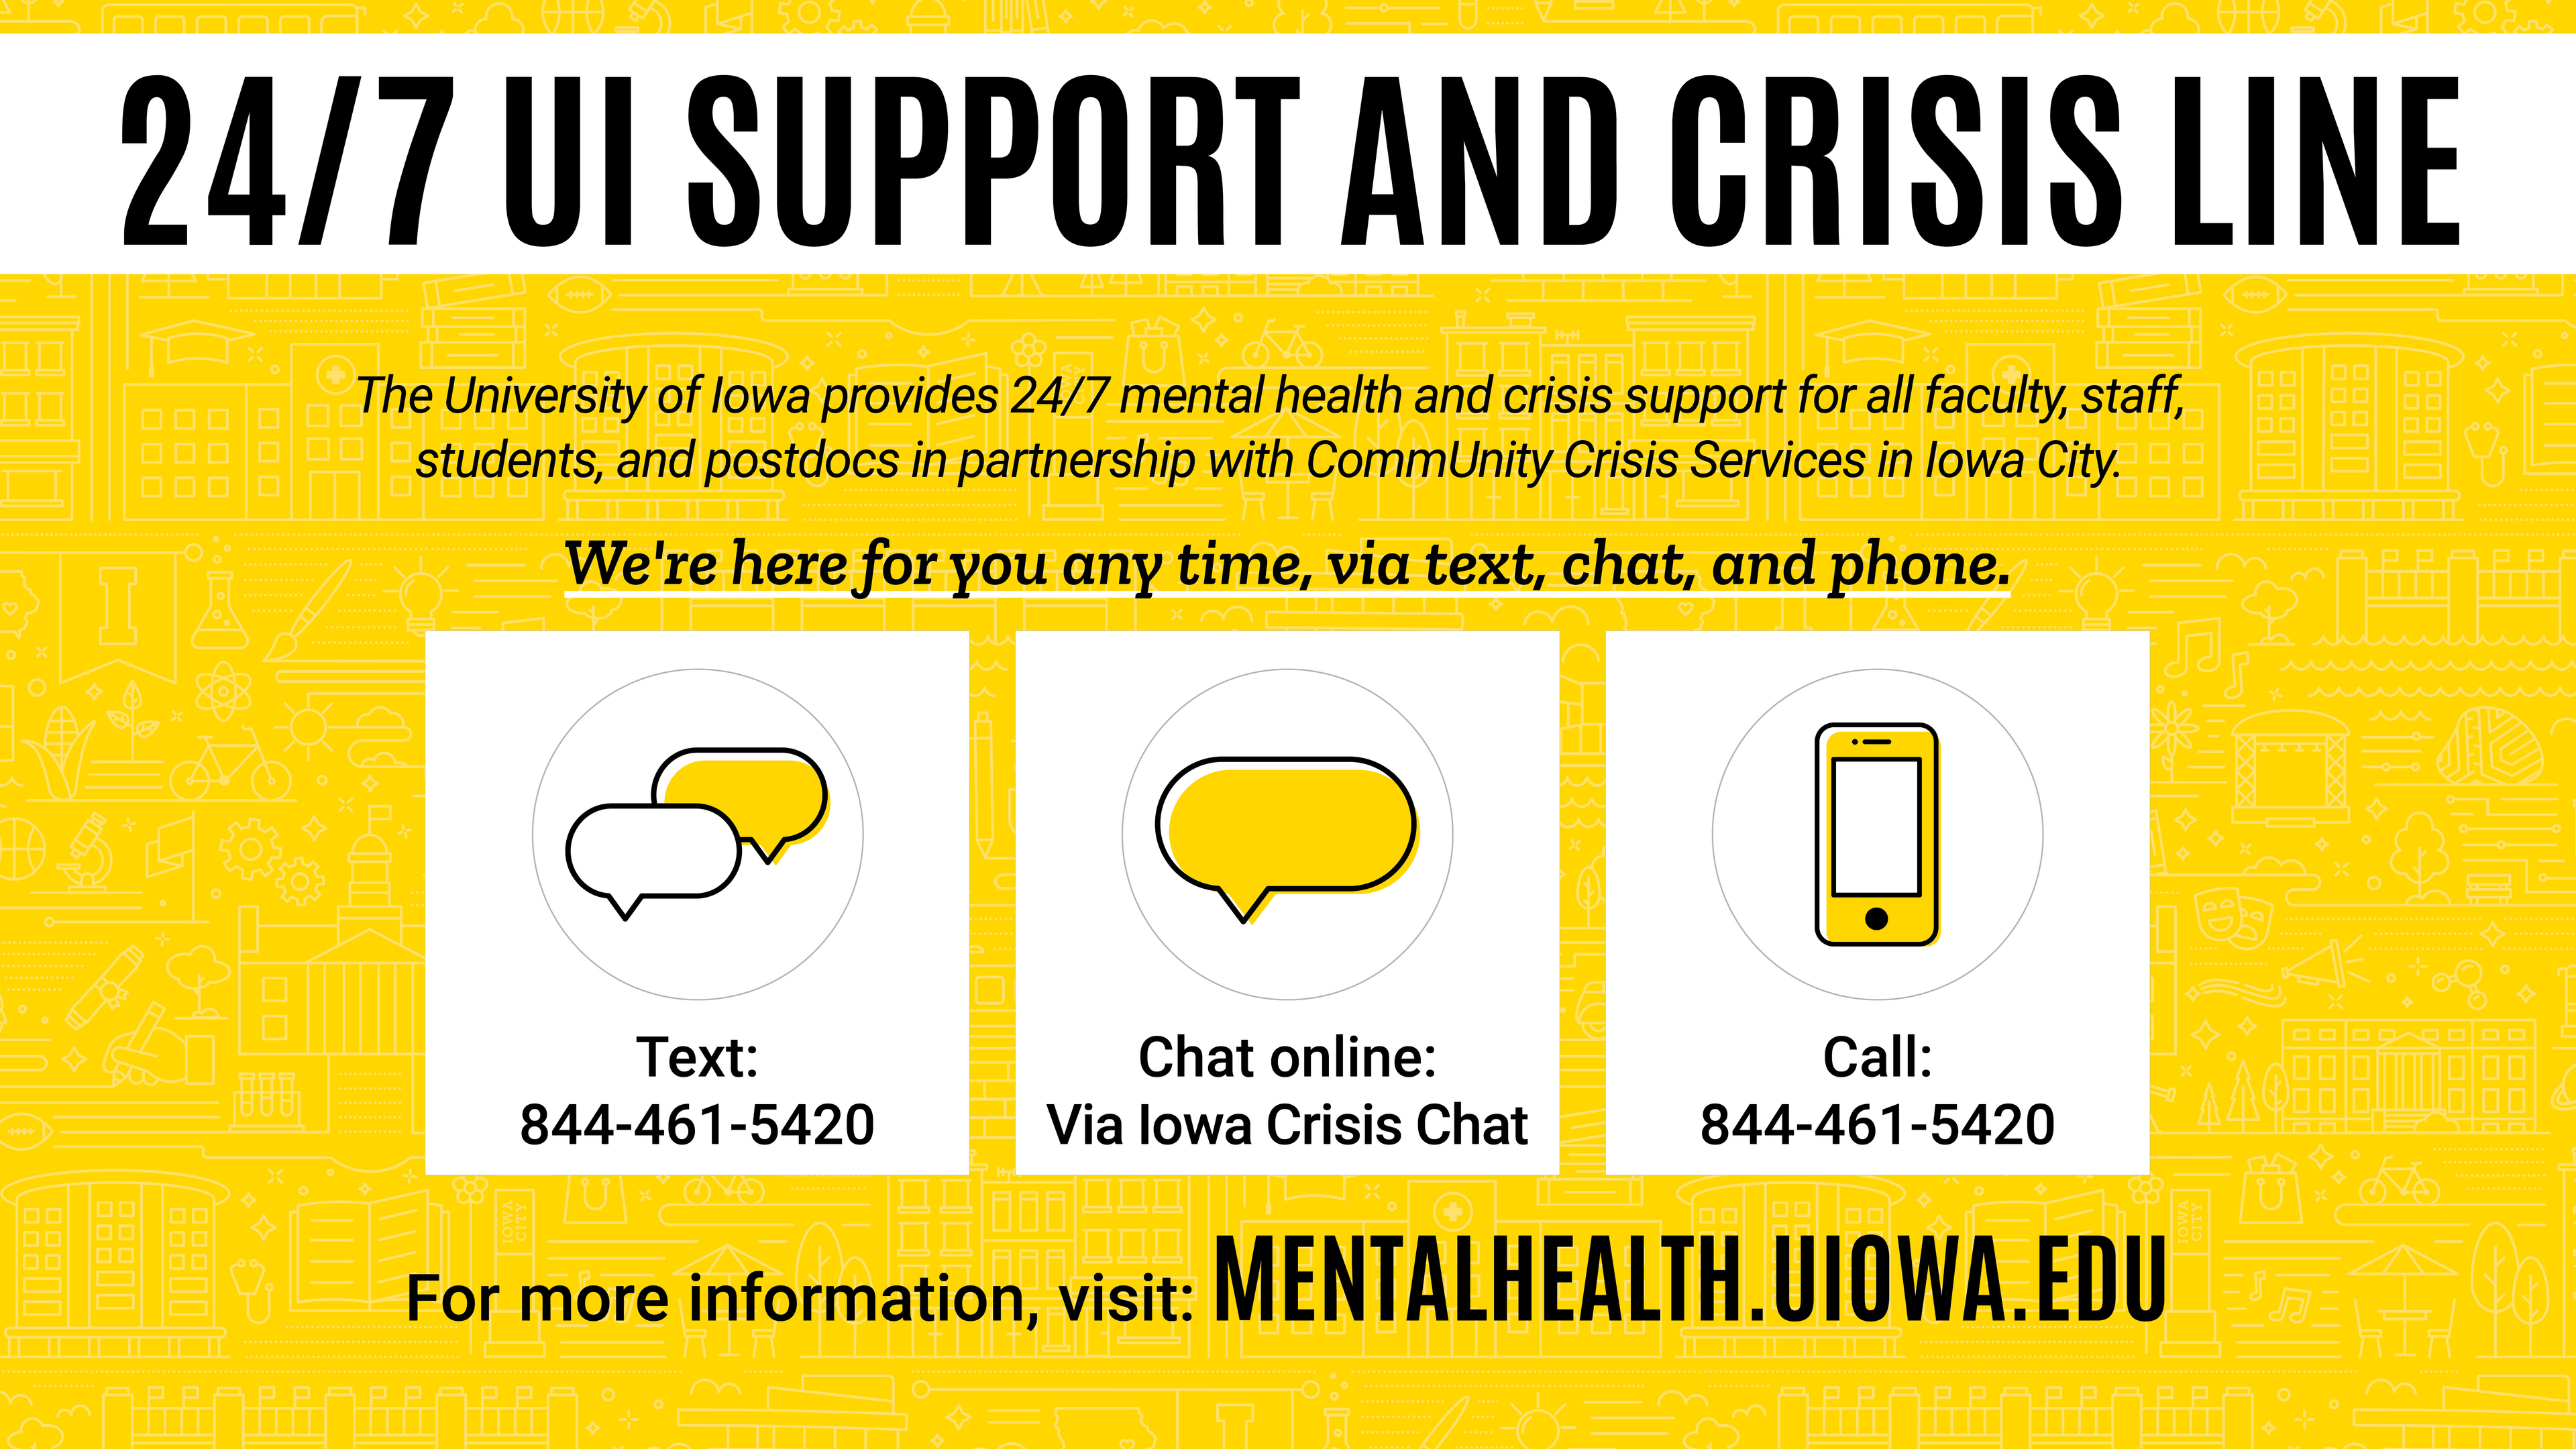 24/7 UI support and crisis line: Call or text: 844-461-5420